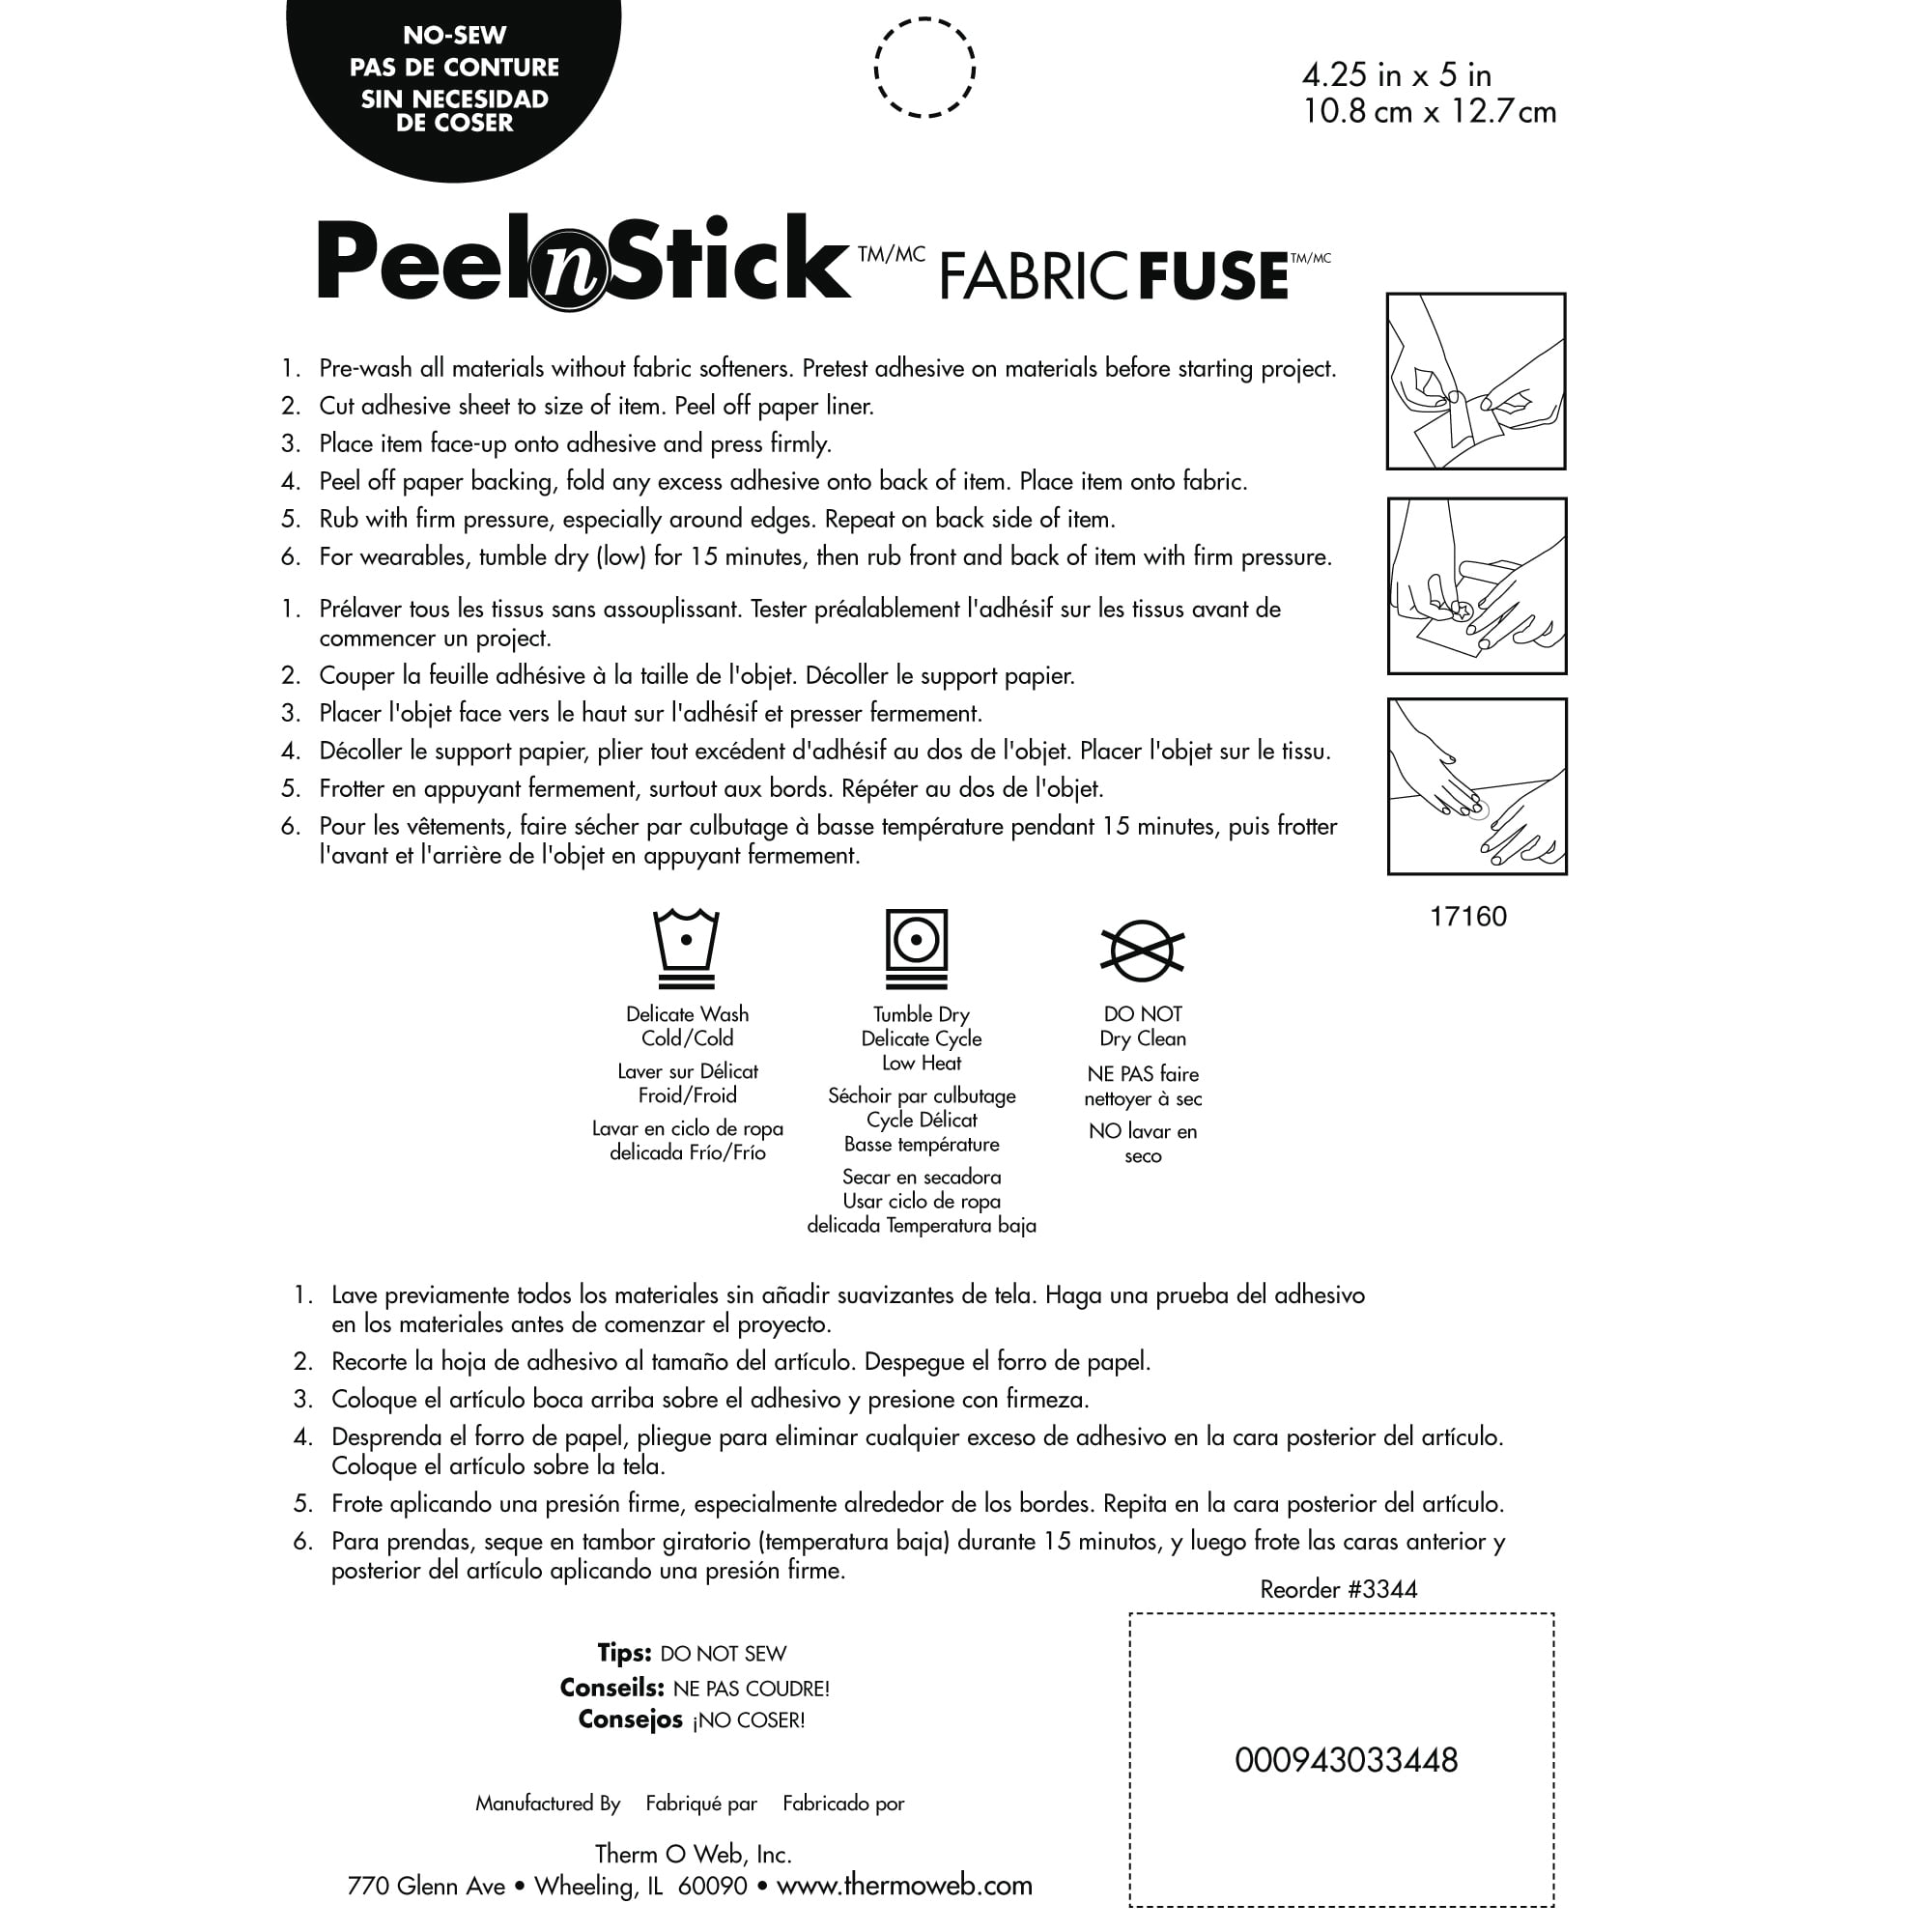 Peel'n Stick Fabric Fuse Sheets 4.25 X 5 Sheets Thermoweb 3344 Lot of 2